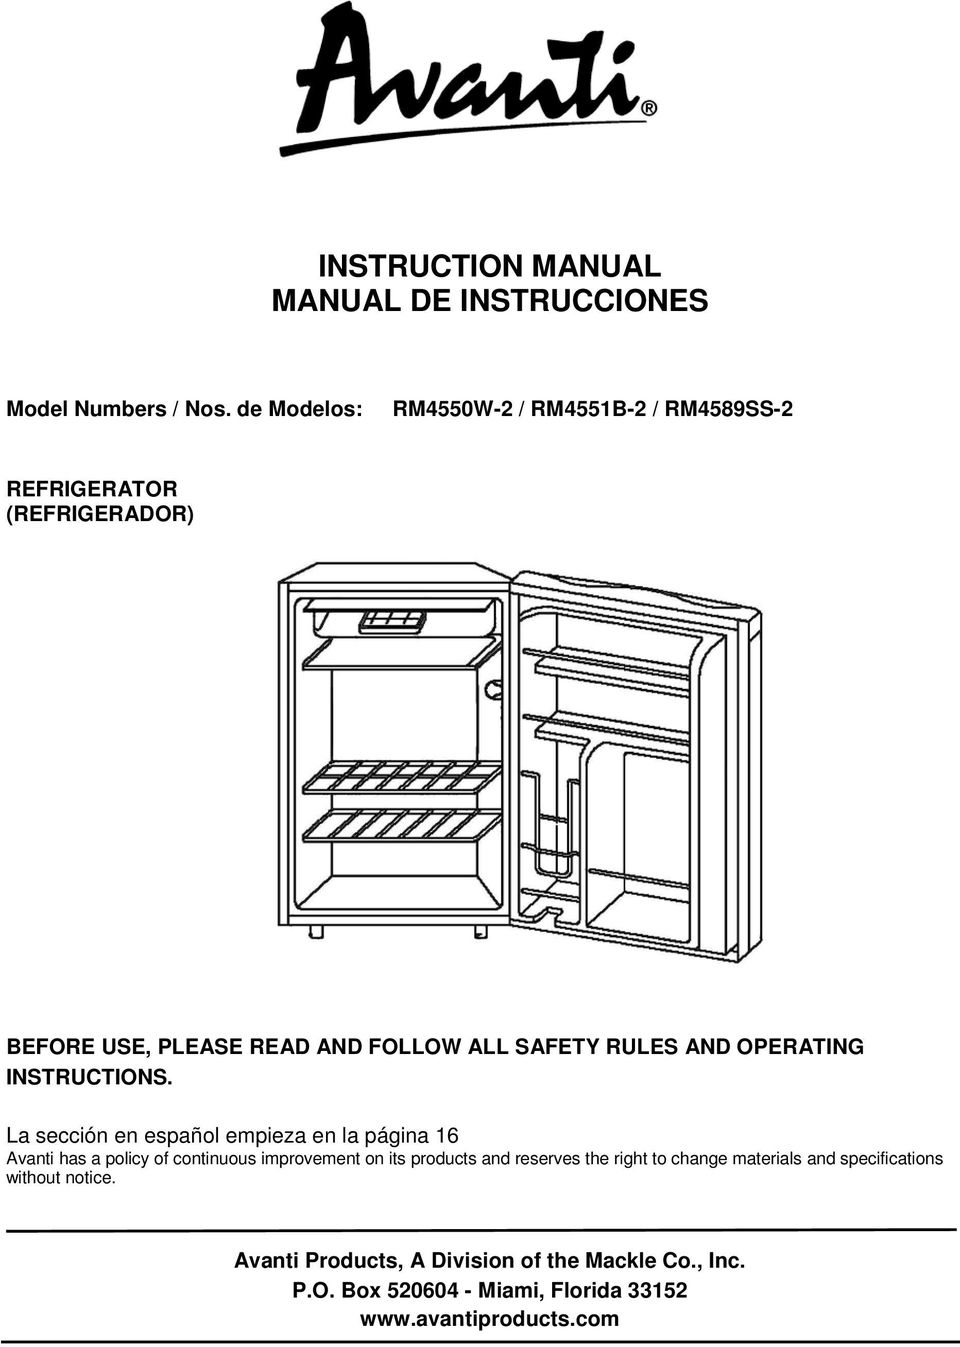 AND OPERATING INSTRUCTIONS.